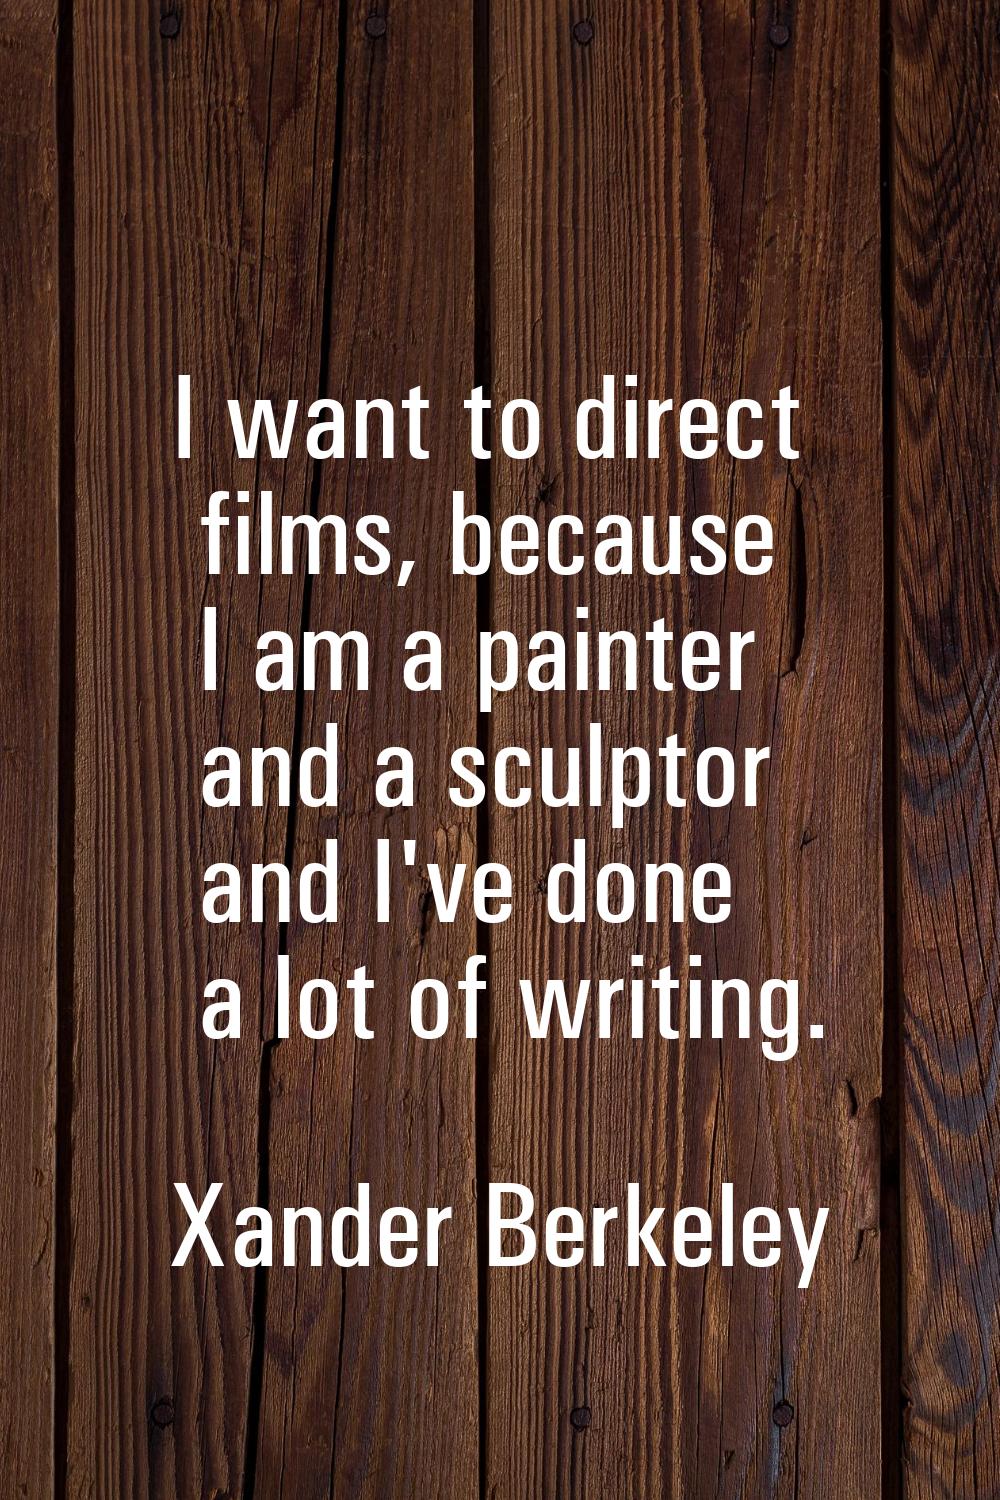 I want to direct films, because I am a painter and a sculptor and I've done a lot of writing.